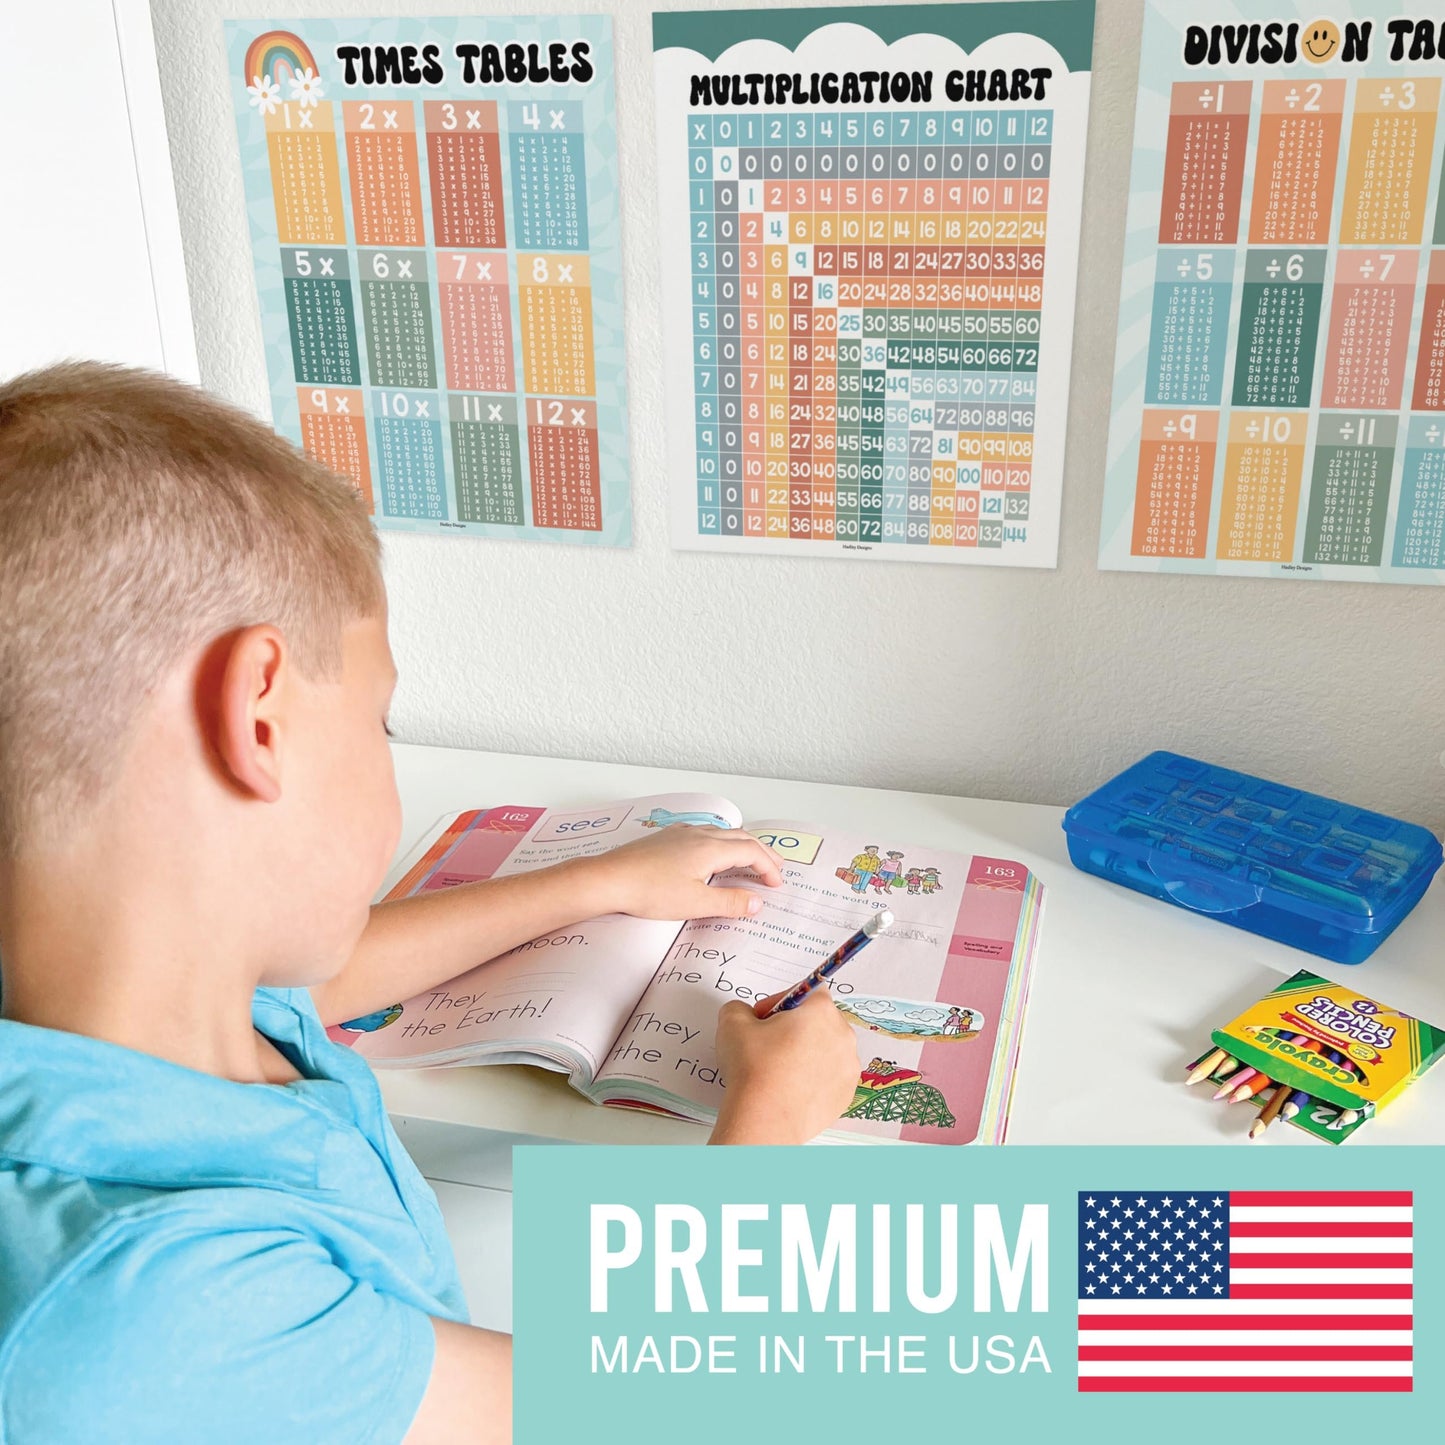 9 Retro Multiplication Chart Poster For Wall - Multiplication Poster For Kids, Multiplication Table Charts, Kids Multiplication Table Poster, Kids Multiplication Table Poster, 5th Grade Math Posters